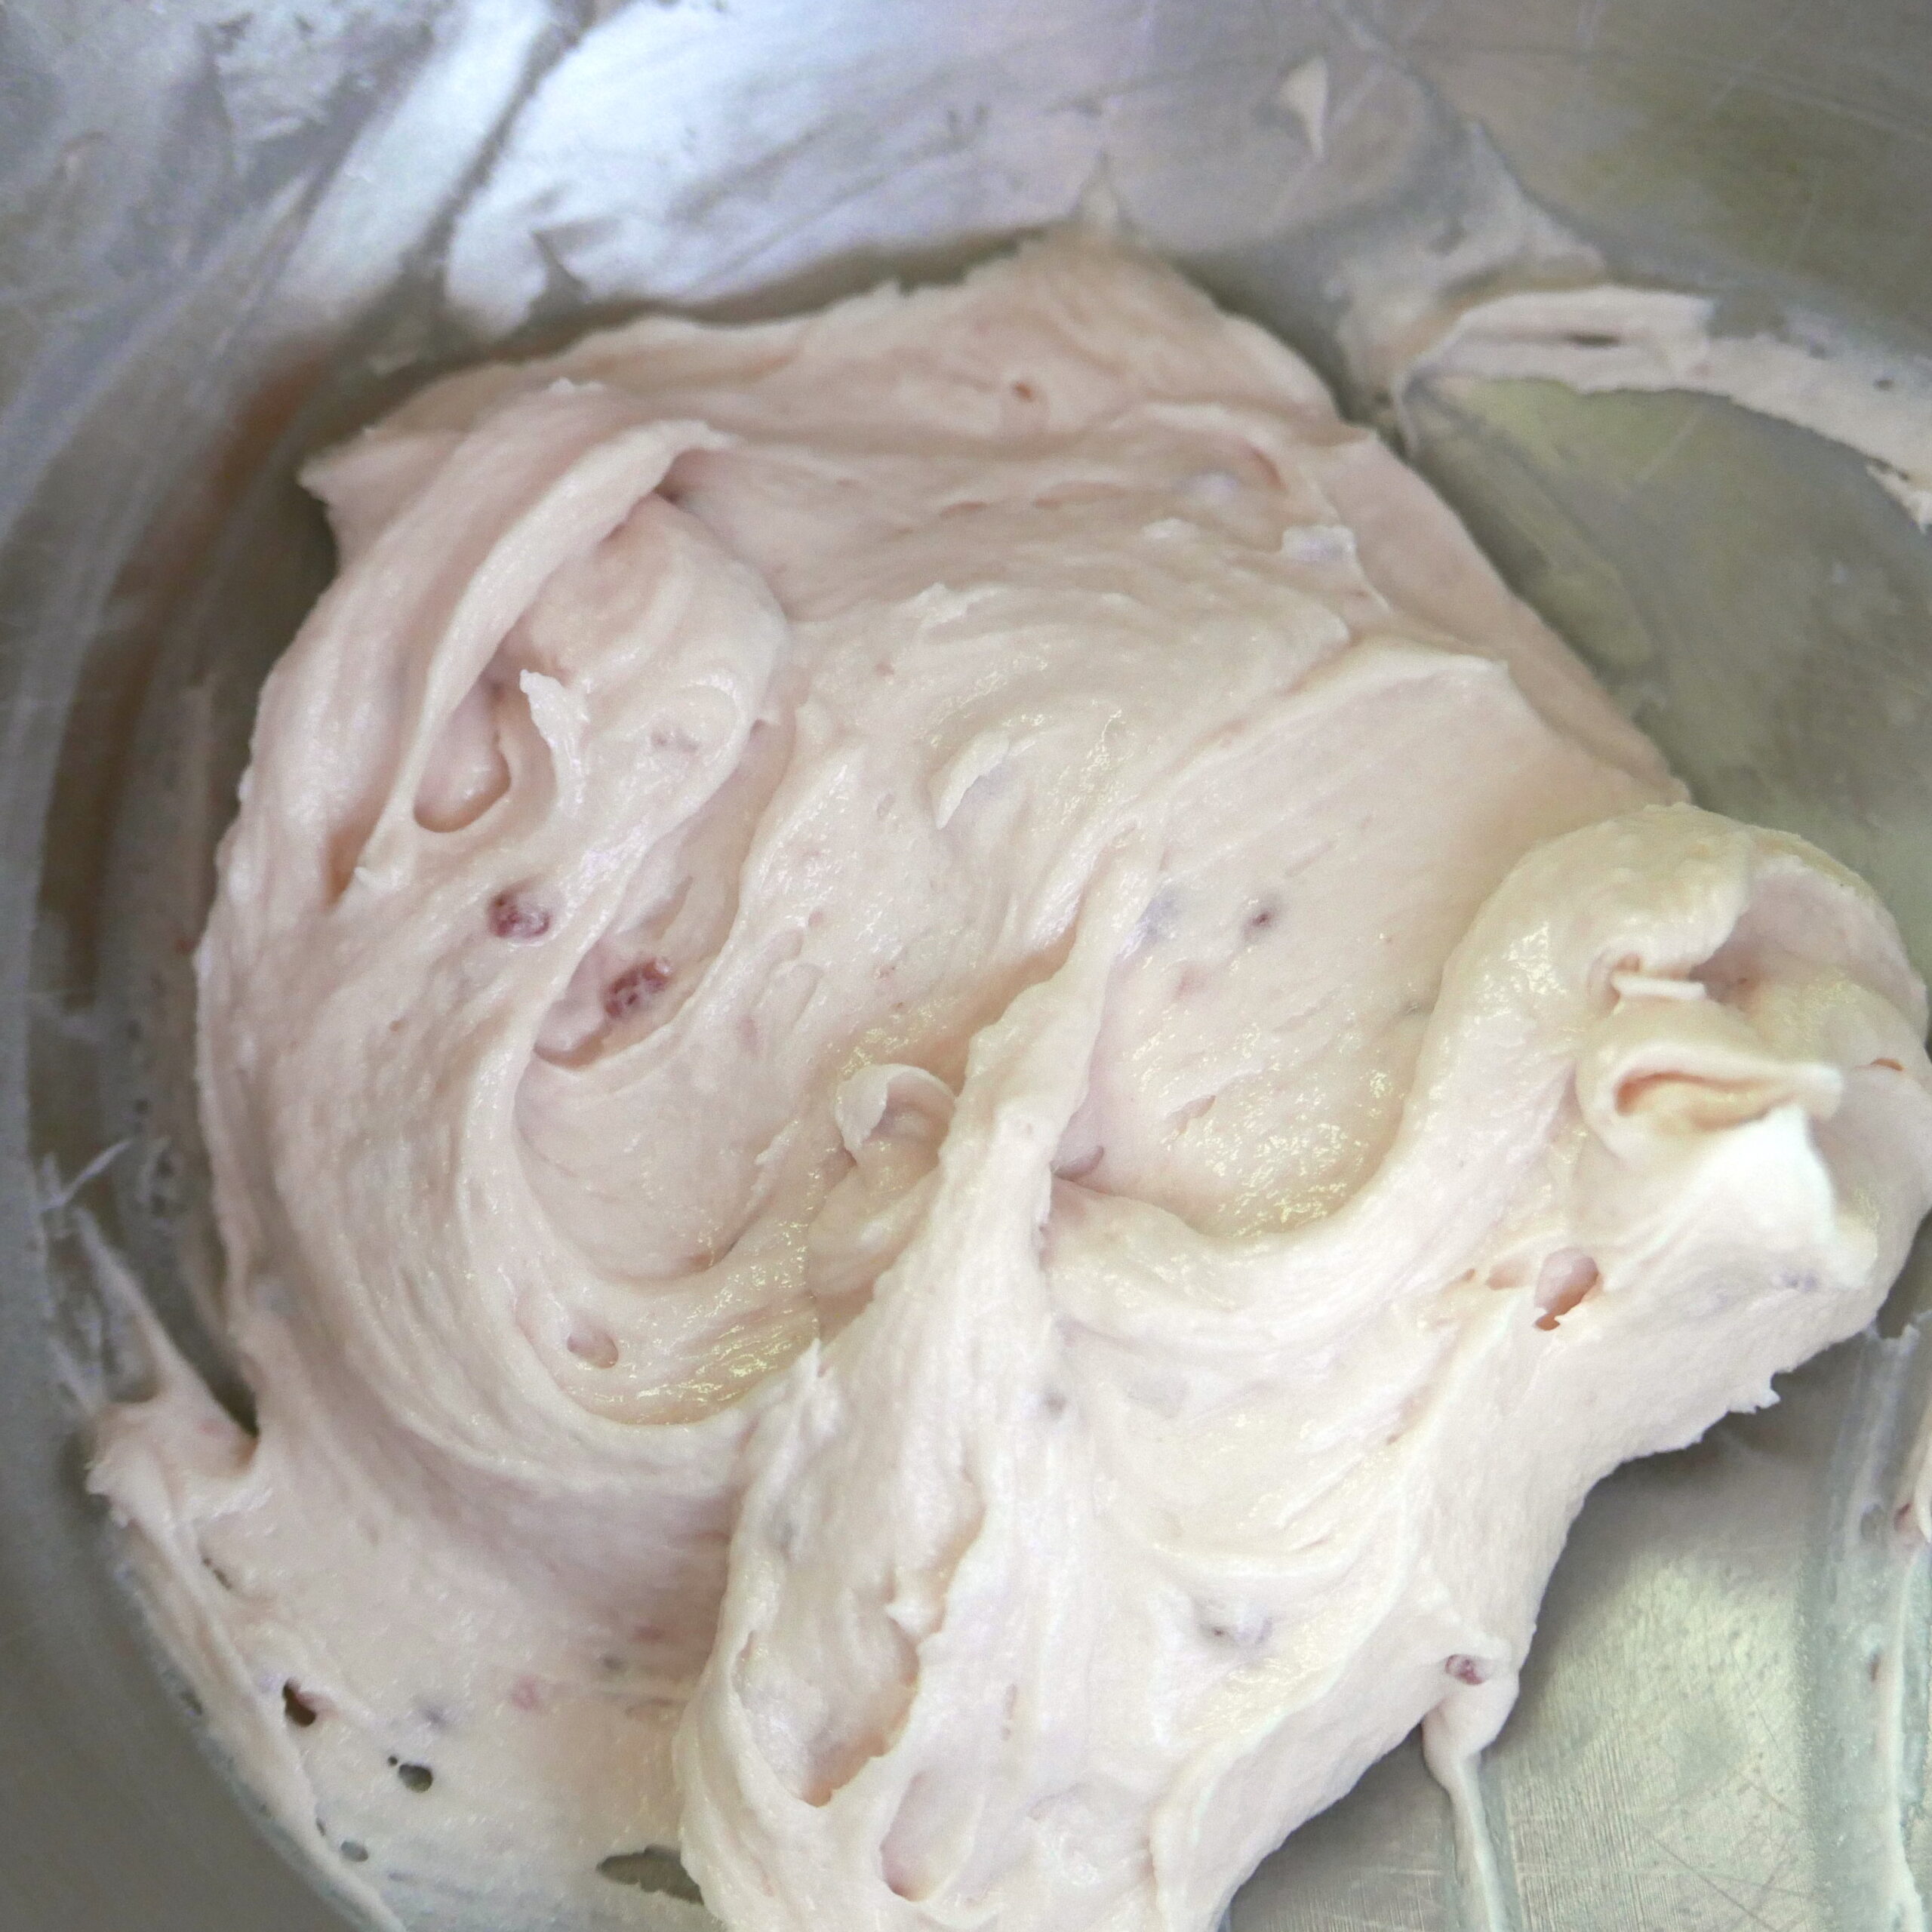 frosting in a mixing bowl